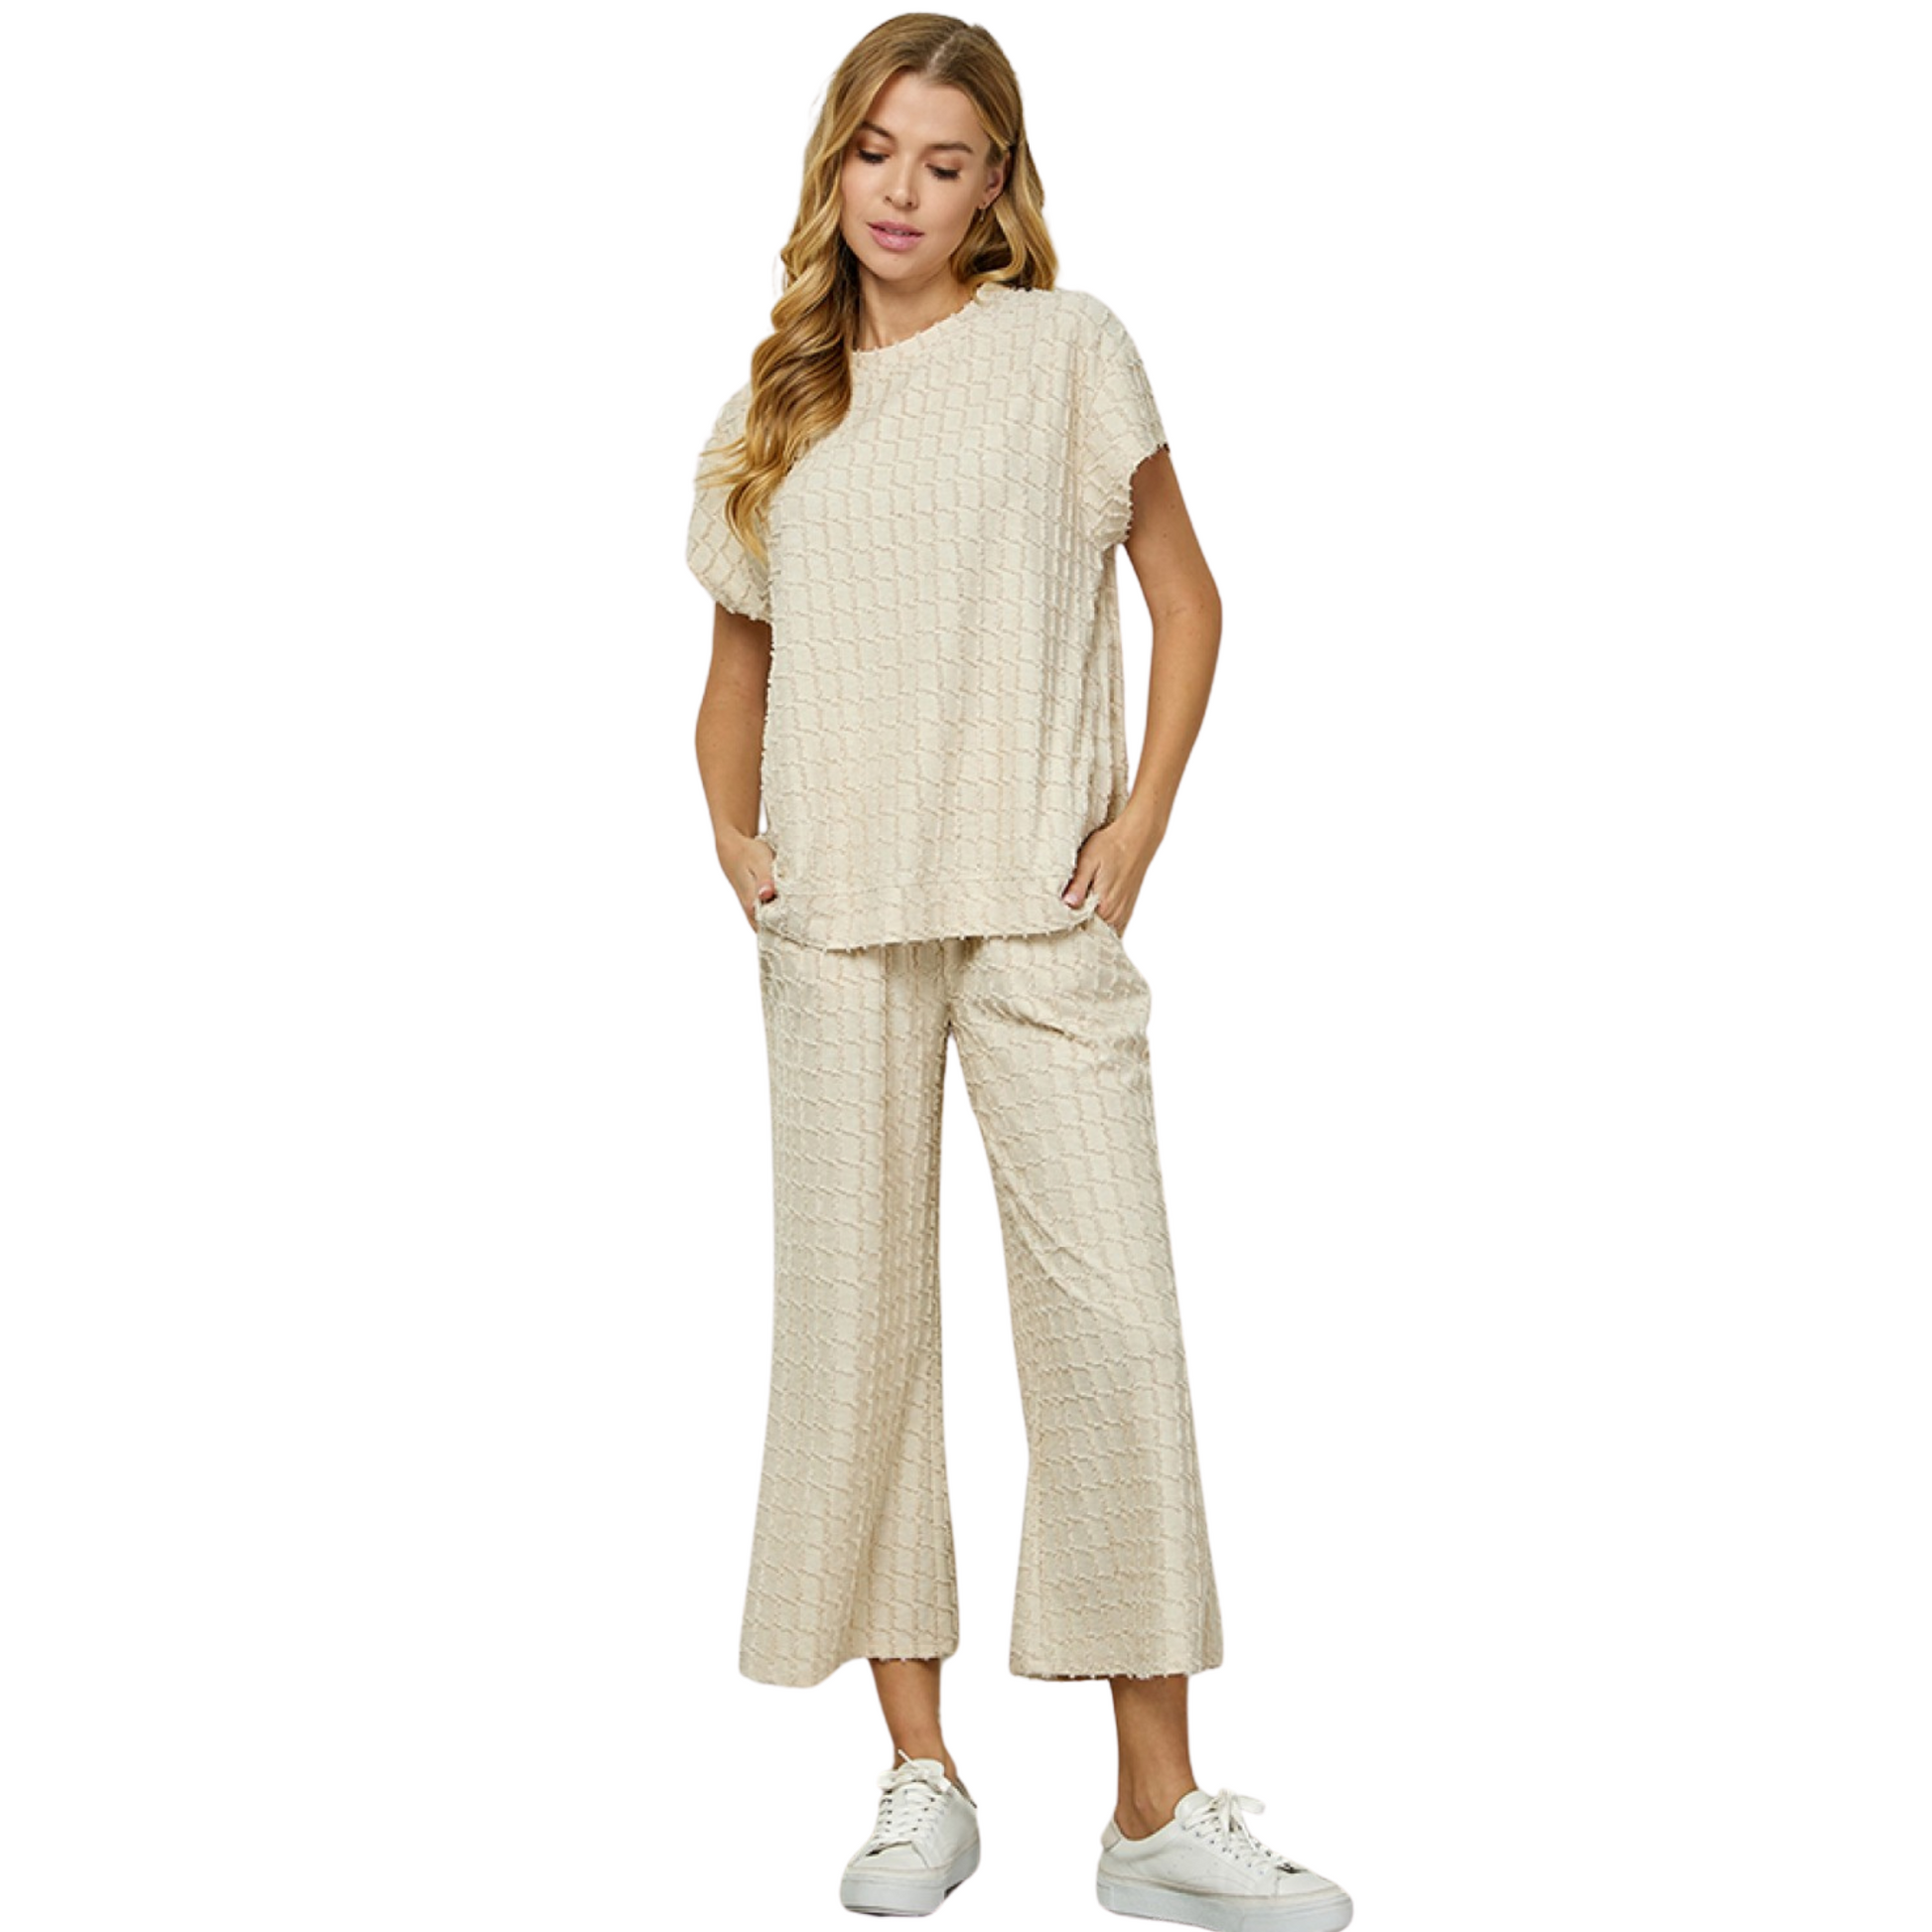 This top and bottom set features a classic cream color, short cap sleeve top, and textured bottom pants. Crafted from a lightweight material, this set is perfect for leisure or formal occasions. Its timeless look and comfortable fit make it a must-have for any wardrobe.